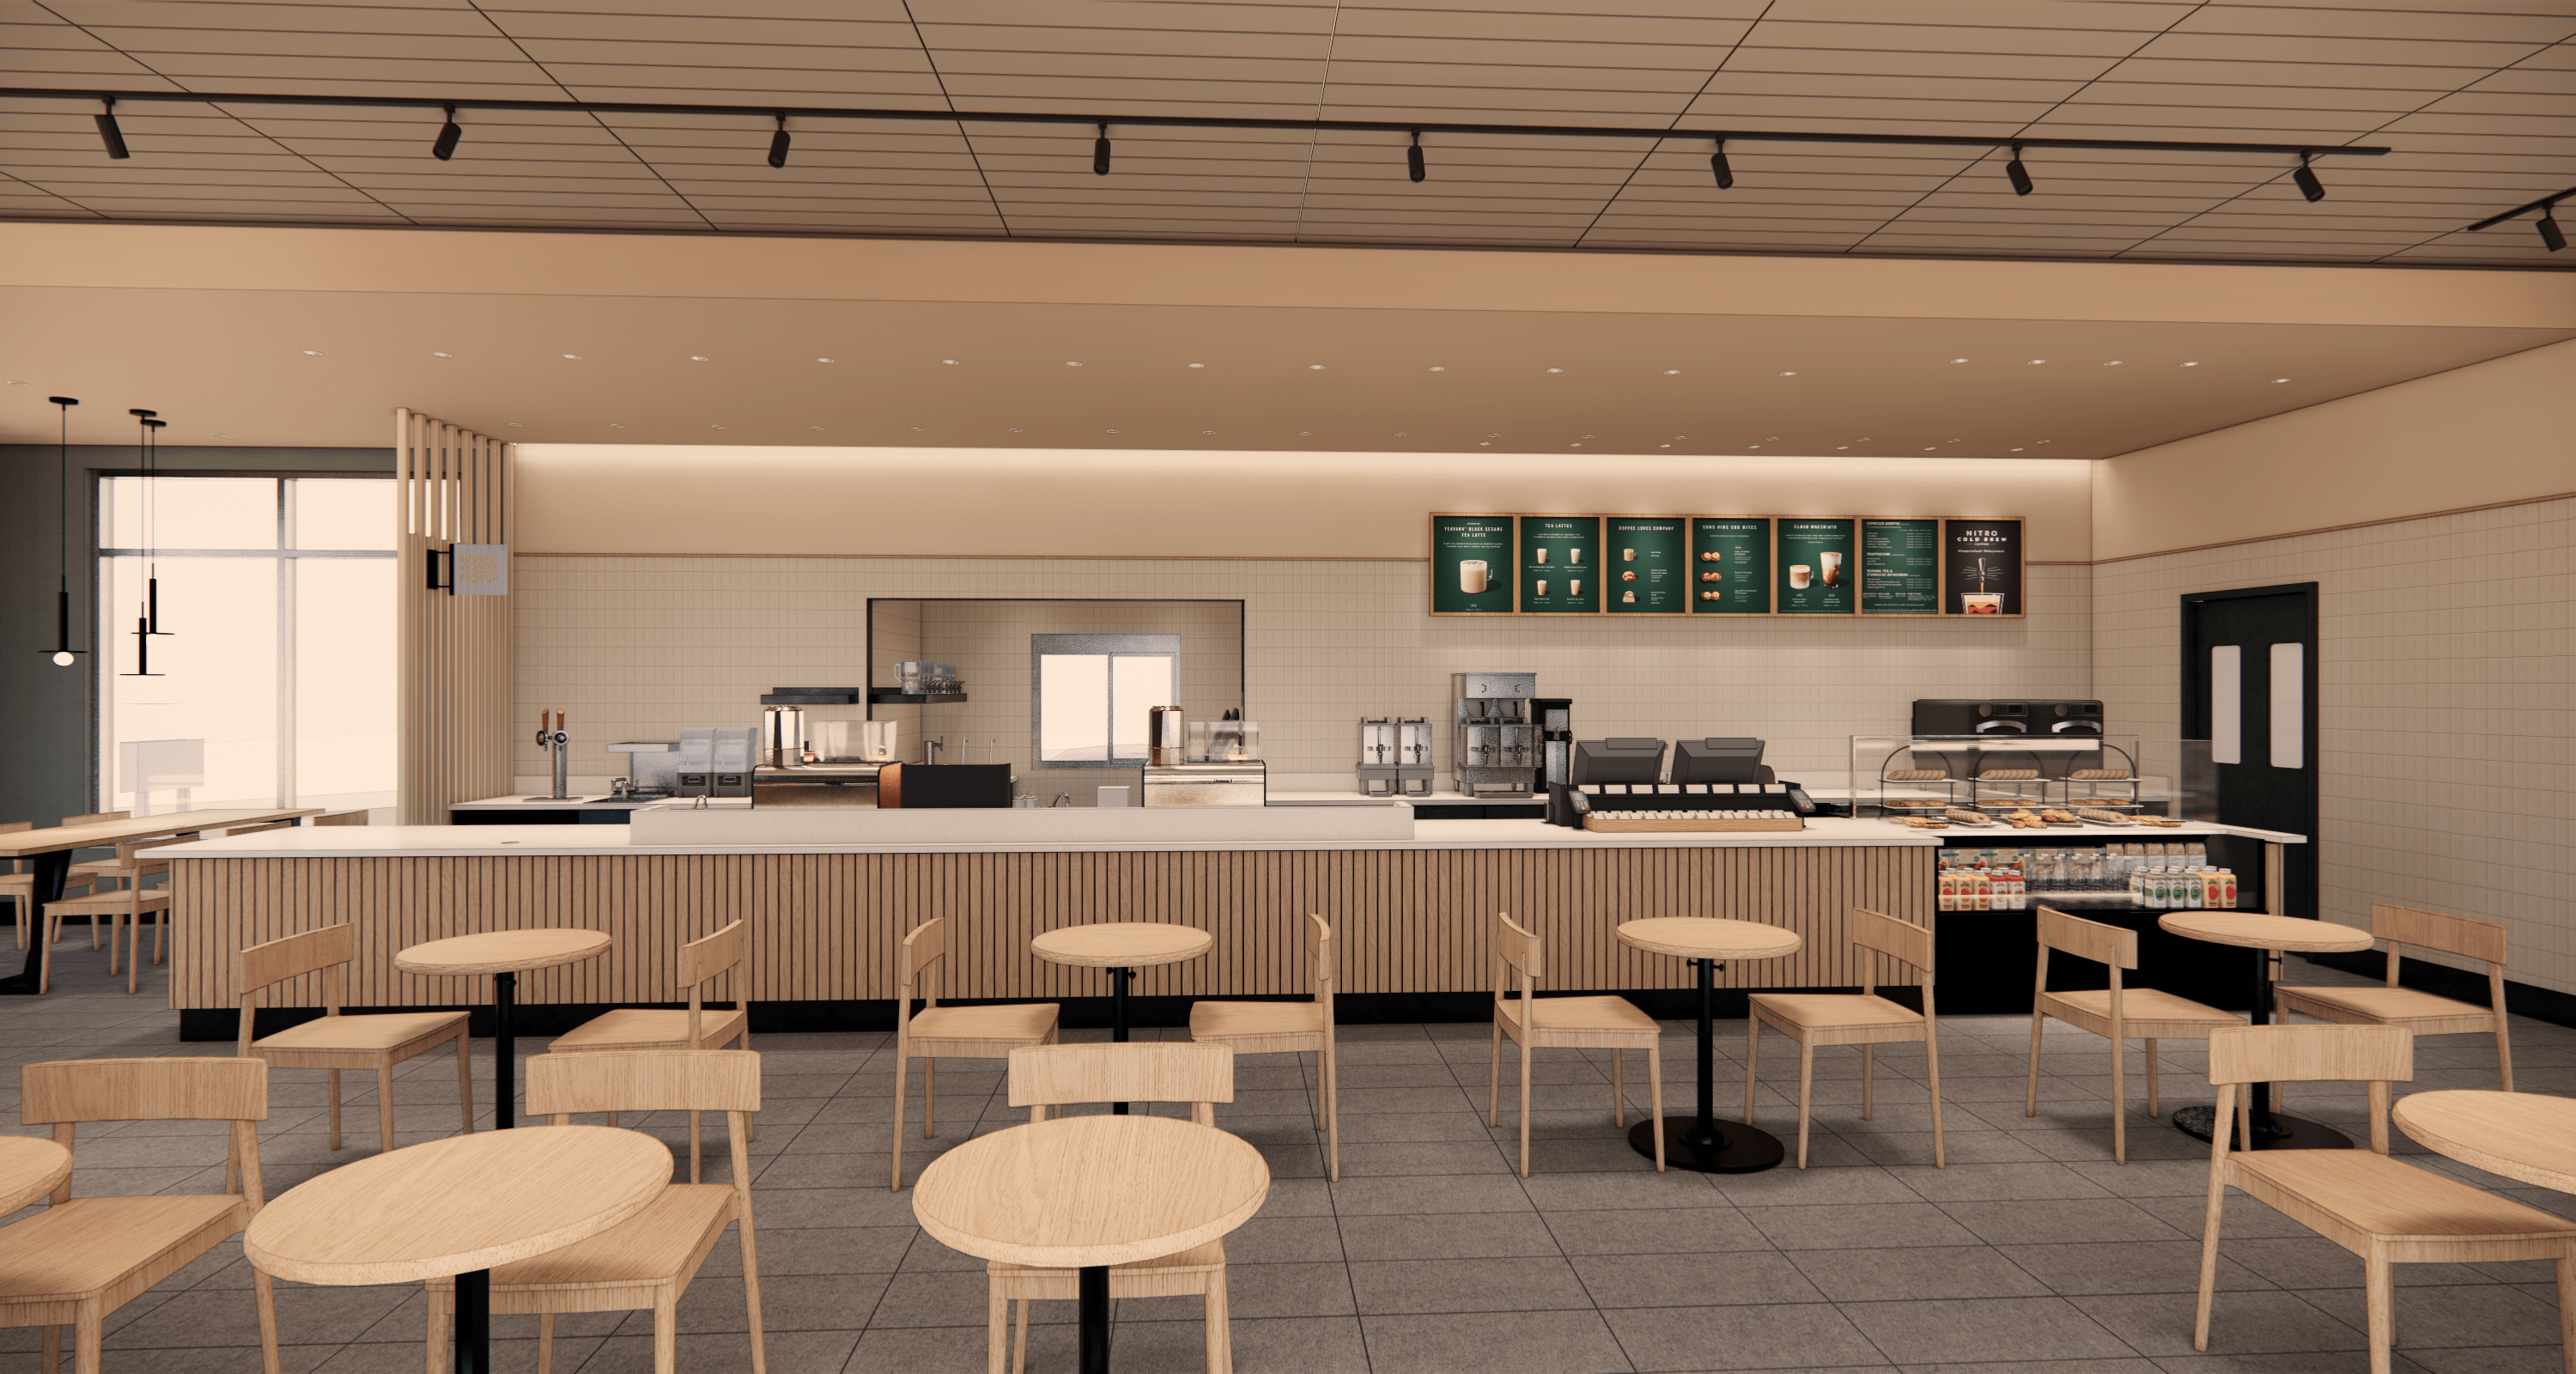 Rendering of Starbucks Canada's first sustainably-constructed drive-thru cafe. Rendering: Starbucks